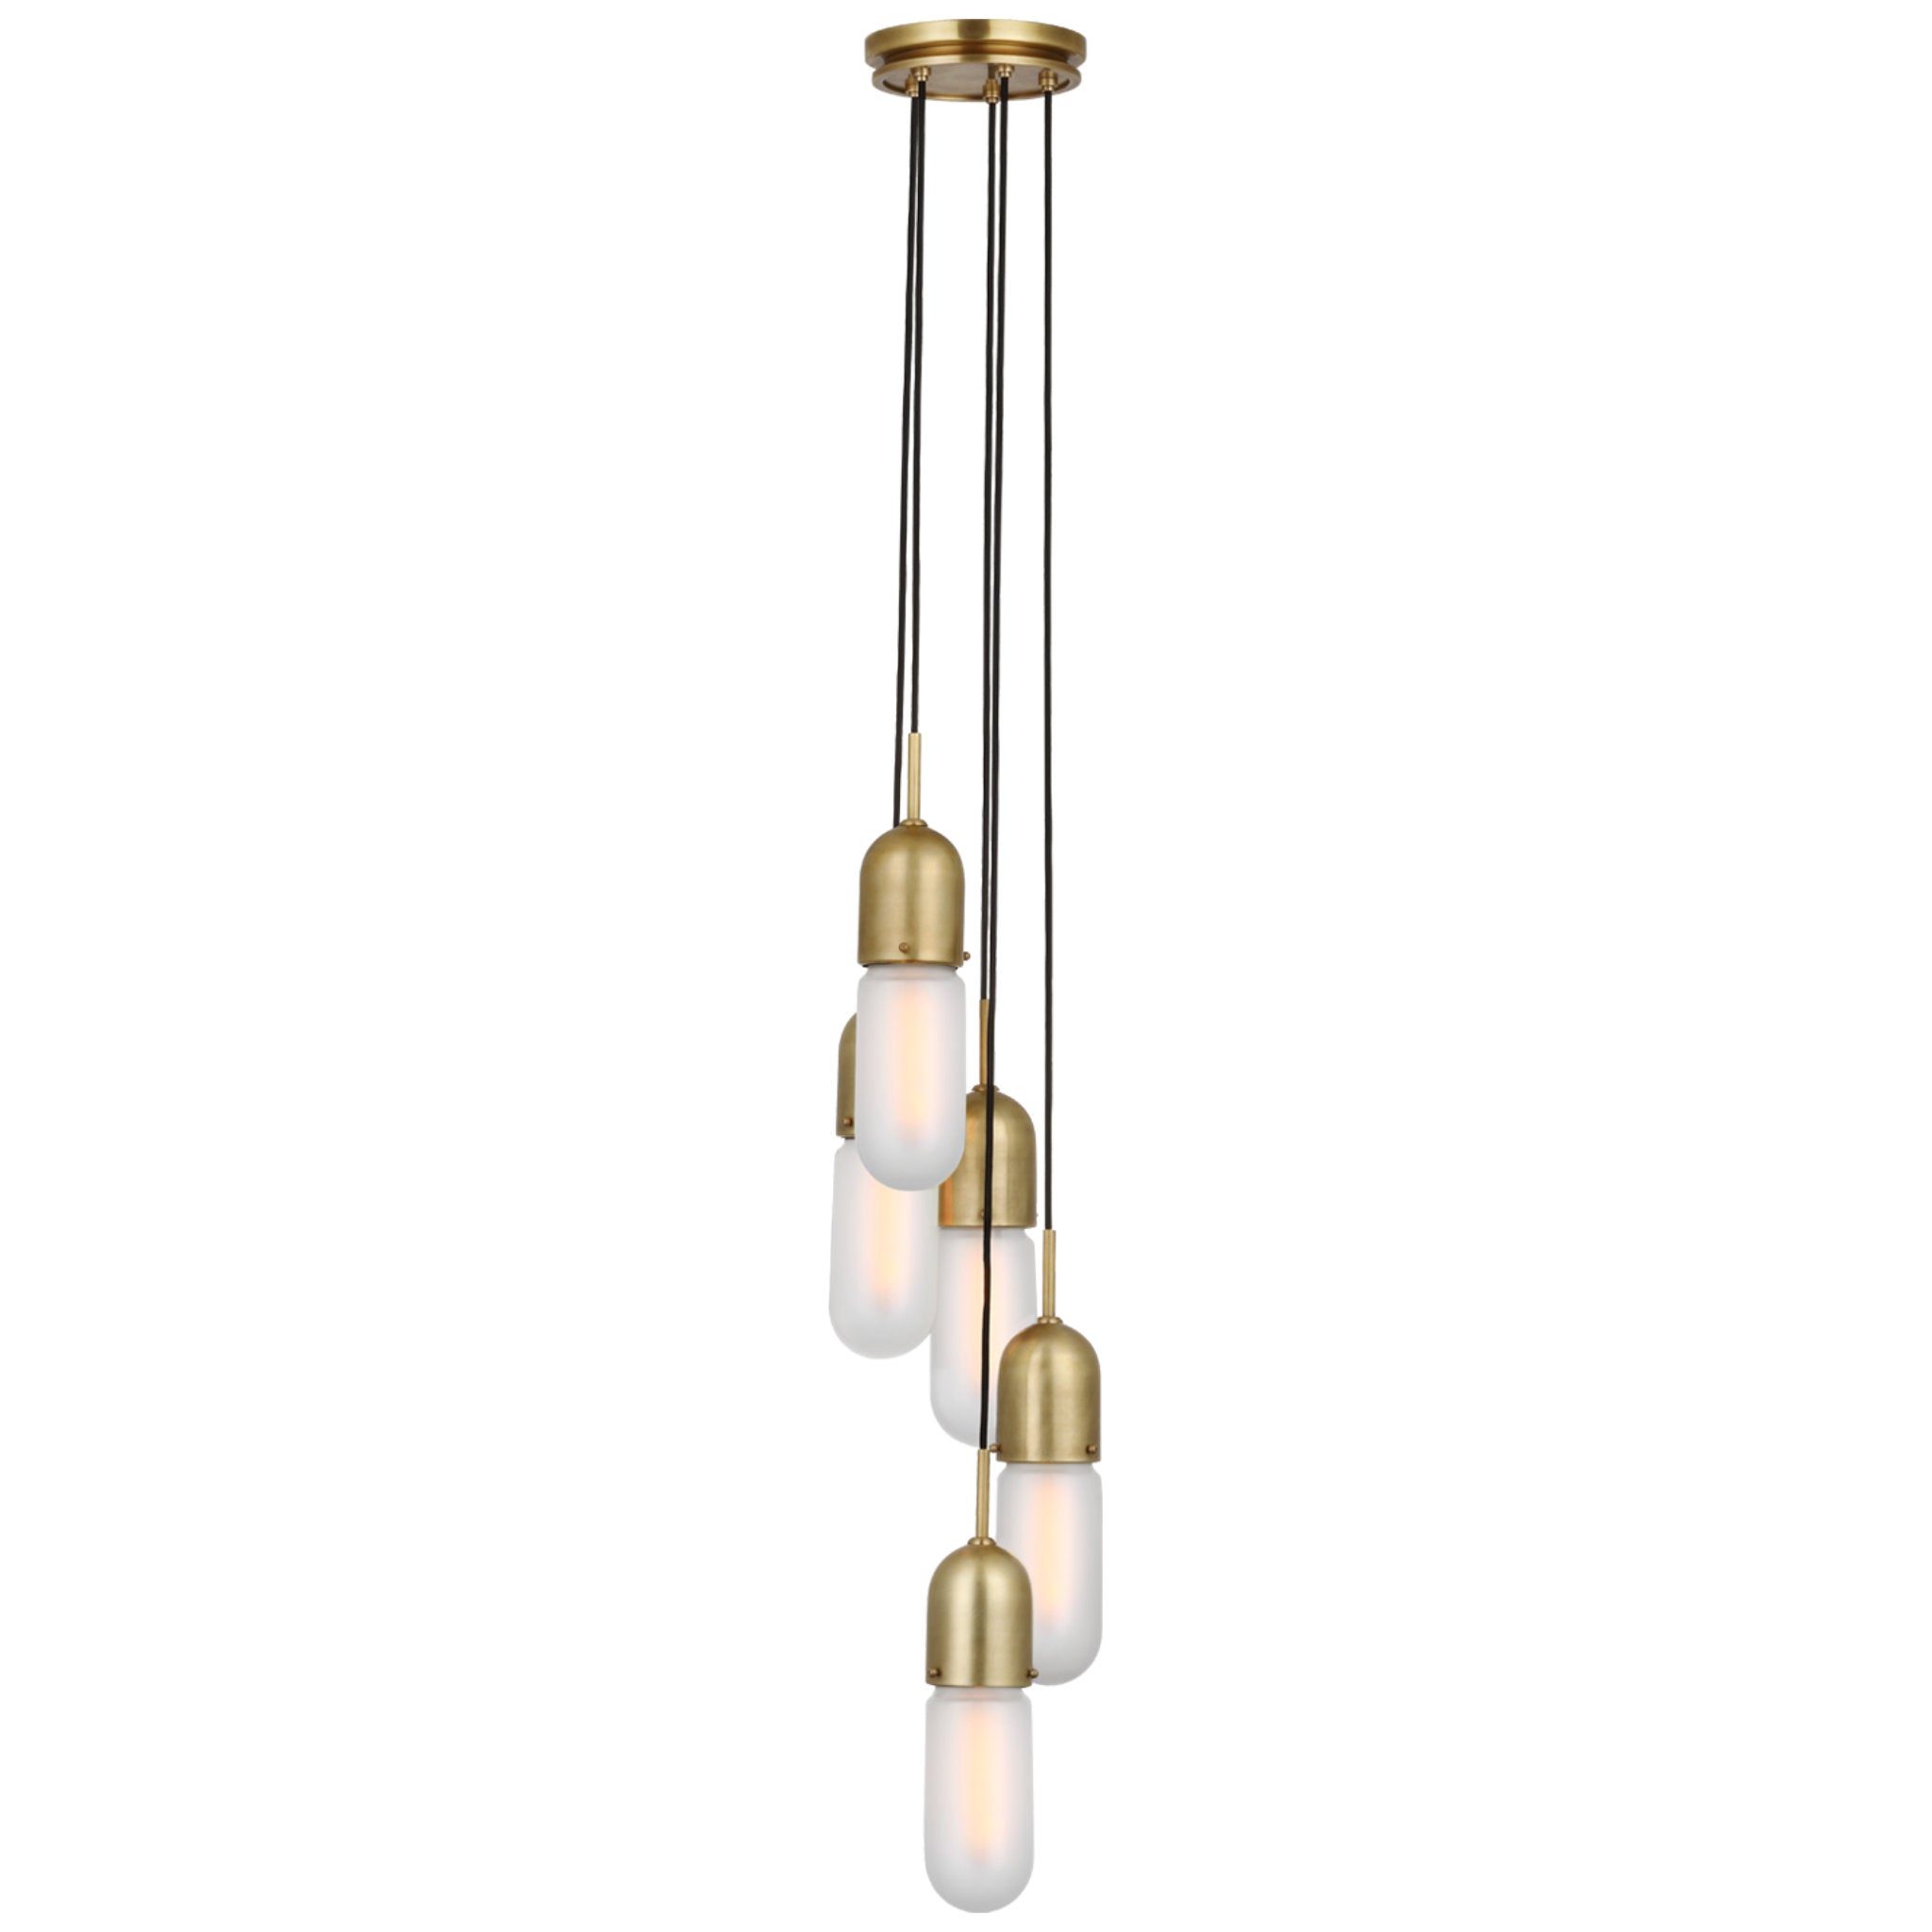 Thomas O'Brien Junio 5-Light Chandelier in Hand-Rubbed Antique Brass with Frosted Glass